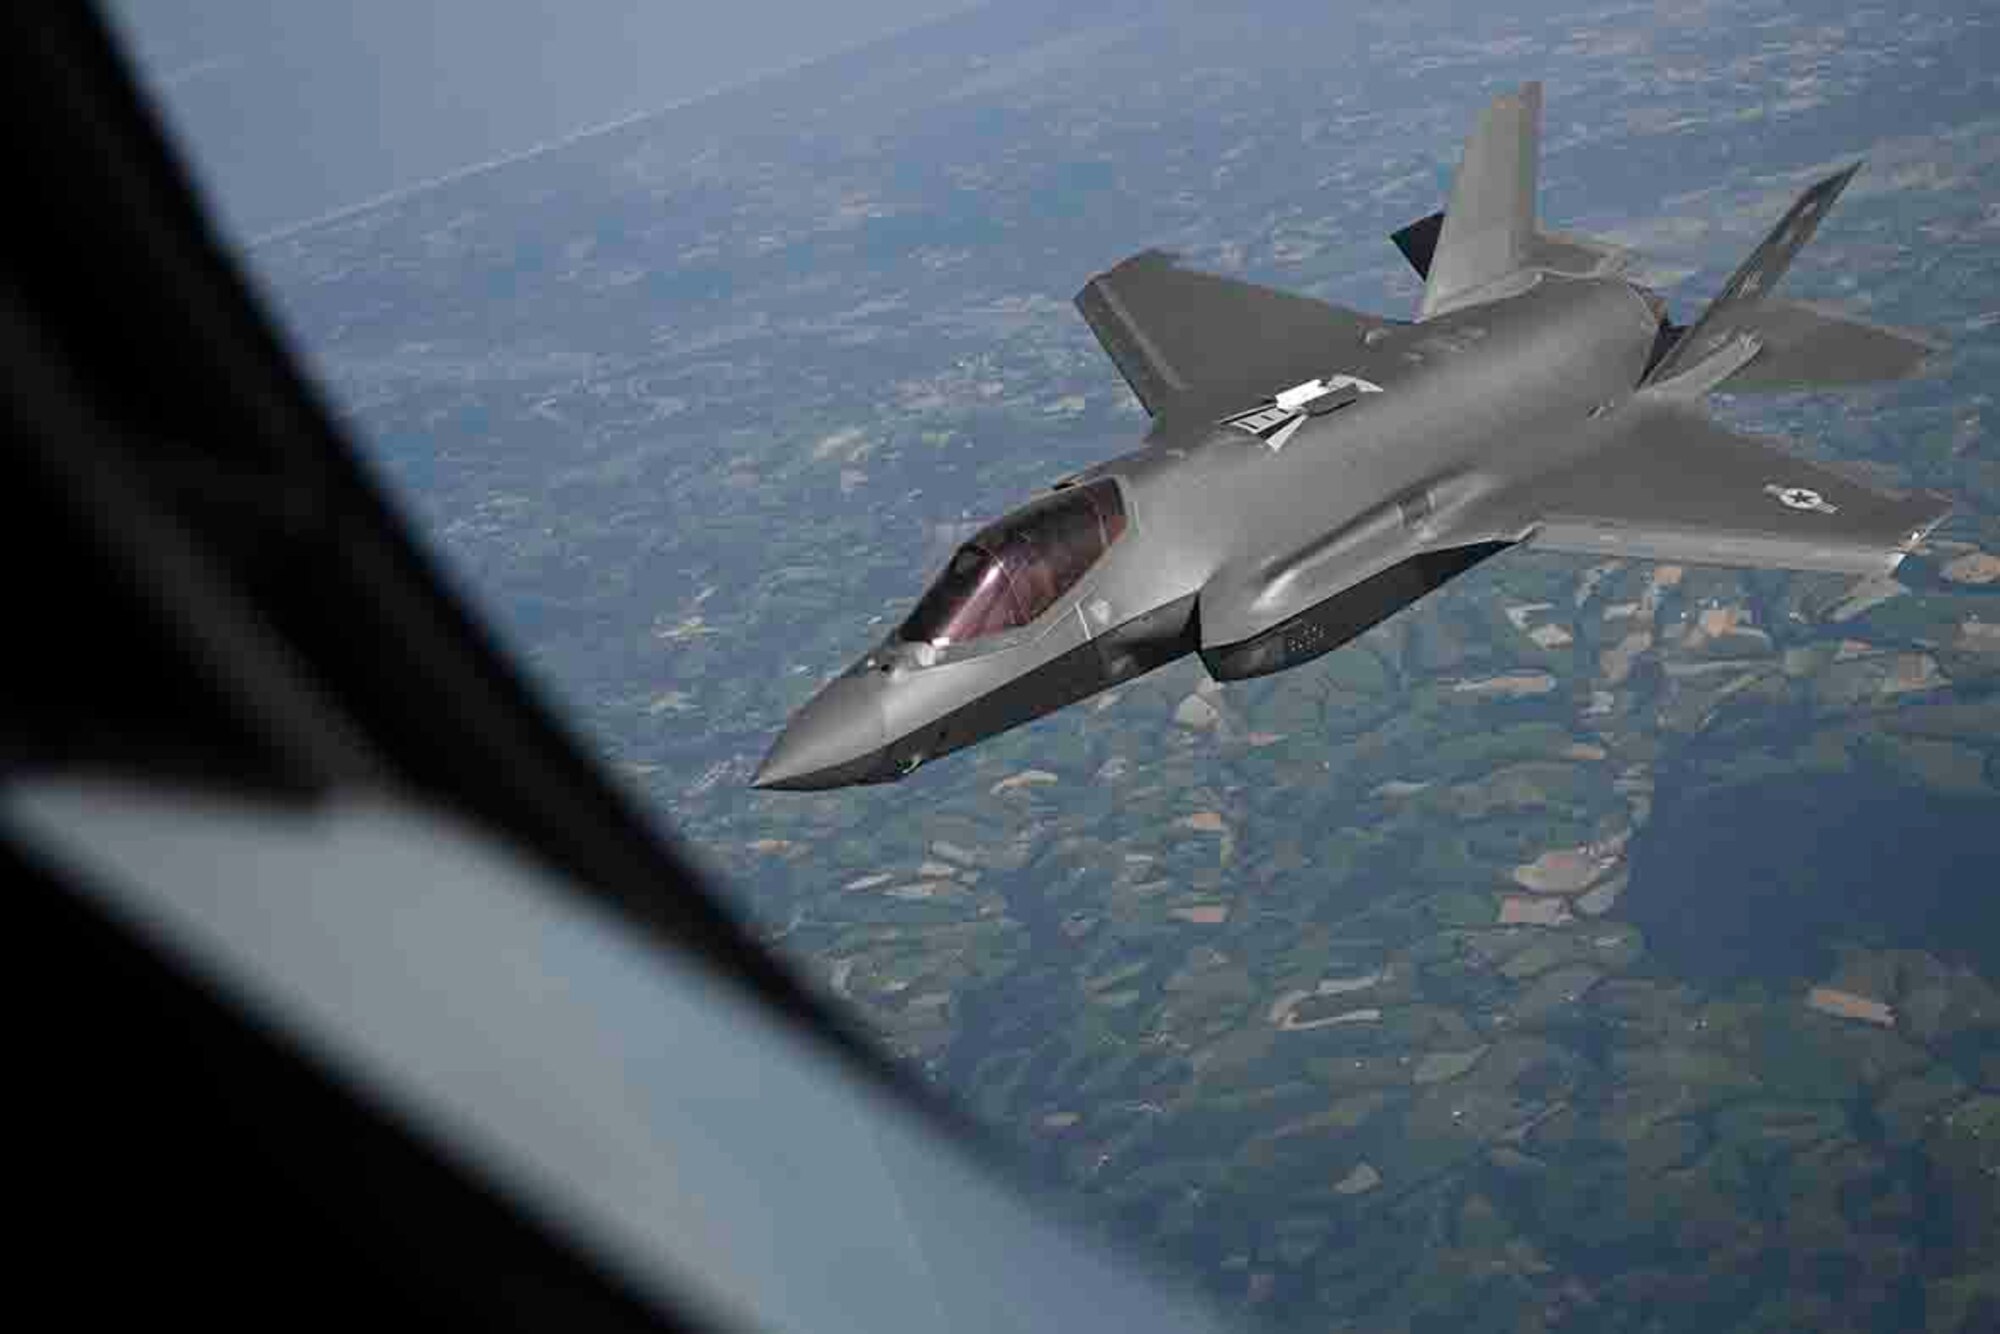 A U.S. Air Force F-35A Lightning II aircraft assigned to the 4th Fighter Squadron, Hill Air Force Base, Utah, departs from a KC-135 Stratotanker aircraft assigned to the 100th Air Refueling Wing, Royal Air Force Mildenhall, England, after receiving fuel over France during exercise Atlantic Trident, May 26, 2021. Our forward-deployed forces are engaged, postured and ready with credible force to assure, deter and defend in an increasingly complex security environment. (U.S. Air Force photo by Senior Airman Joseph Barron)